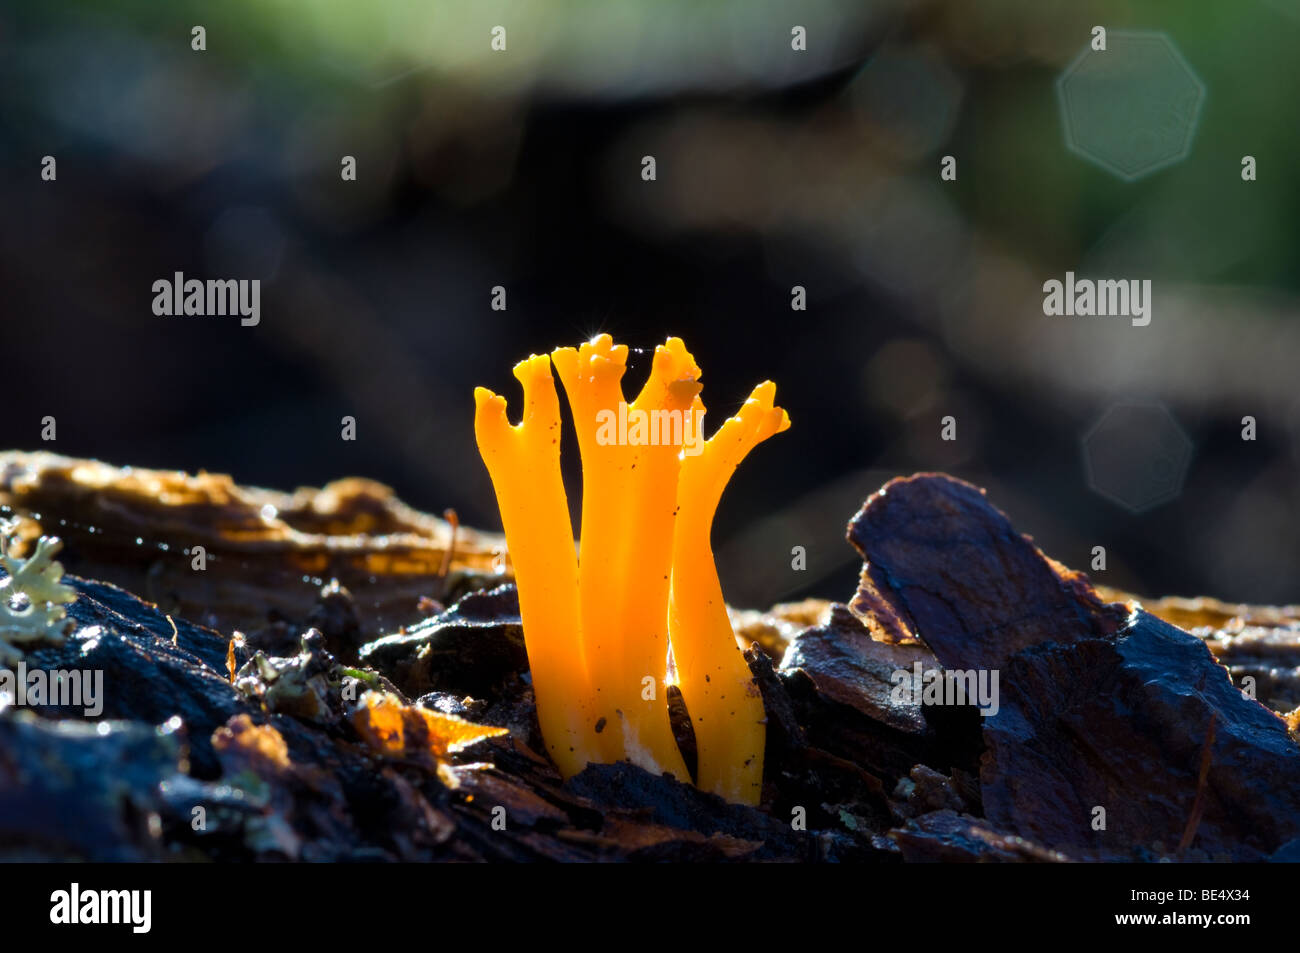 Yellow Antler fungus, Calocera viscosa, growing on woodland floor. Also known as Stagshorn, Stag Horn, or Jelly Antler fungus. Stock Photo